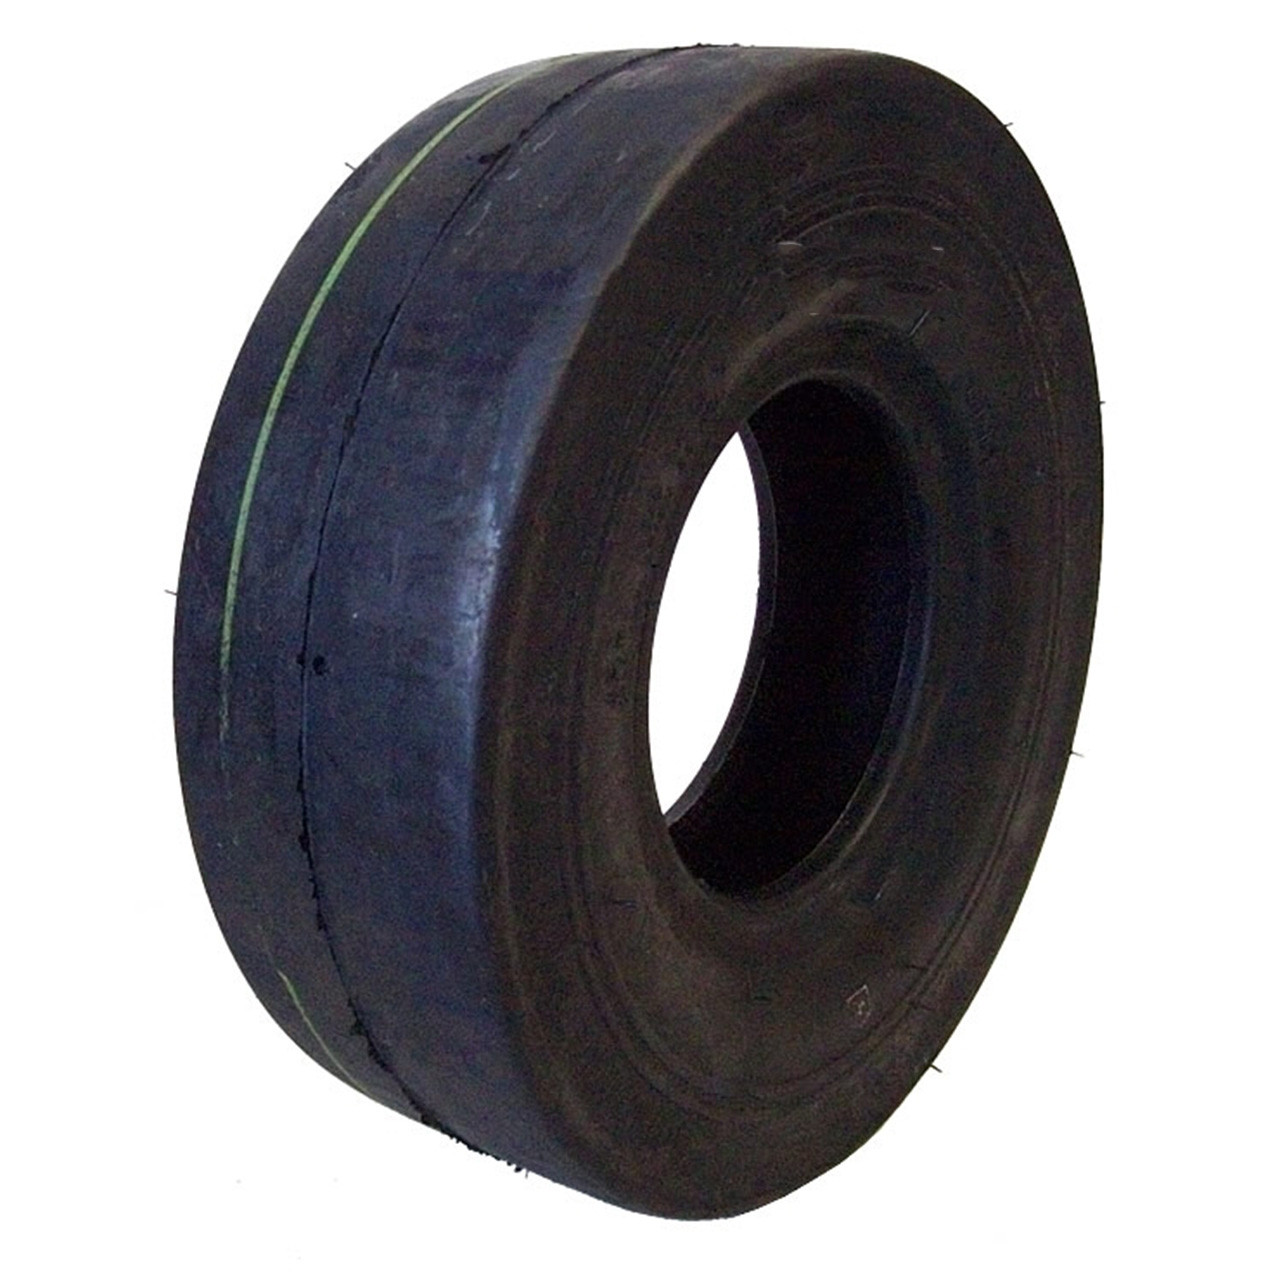 7032 STUDDED TIRE, for Go Kart or Mini Bike, size 410-350 X 4, 4 PLY, 3.5  WIDE, 10.5 OD